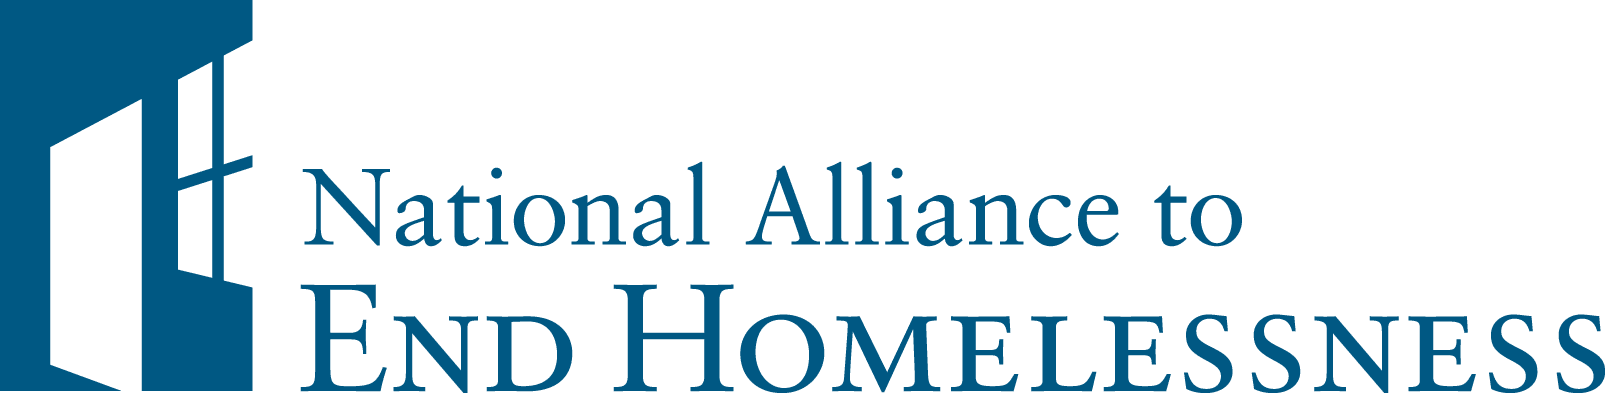 National Alliance to End Homelessness logo